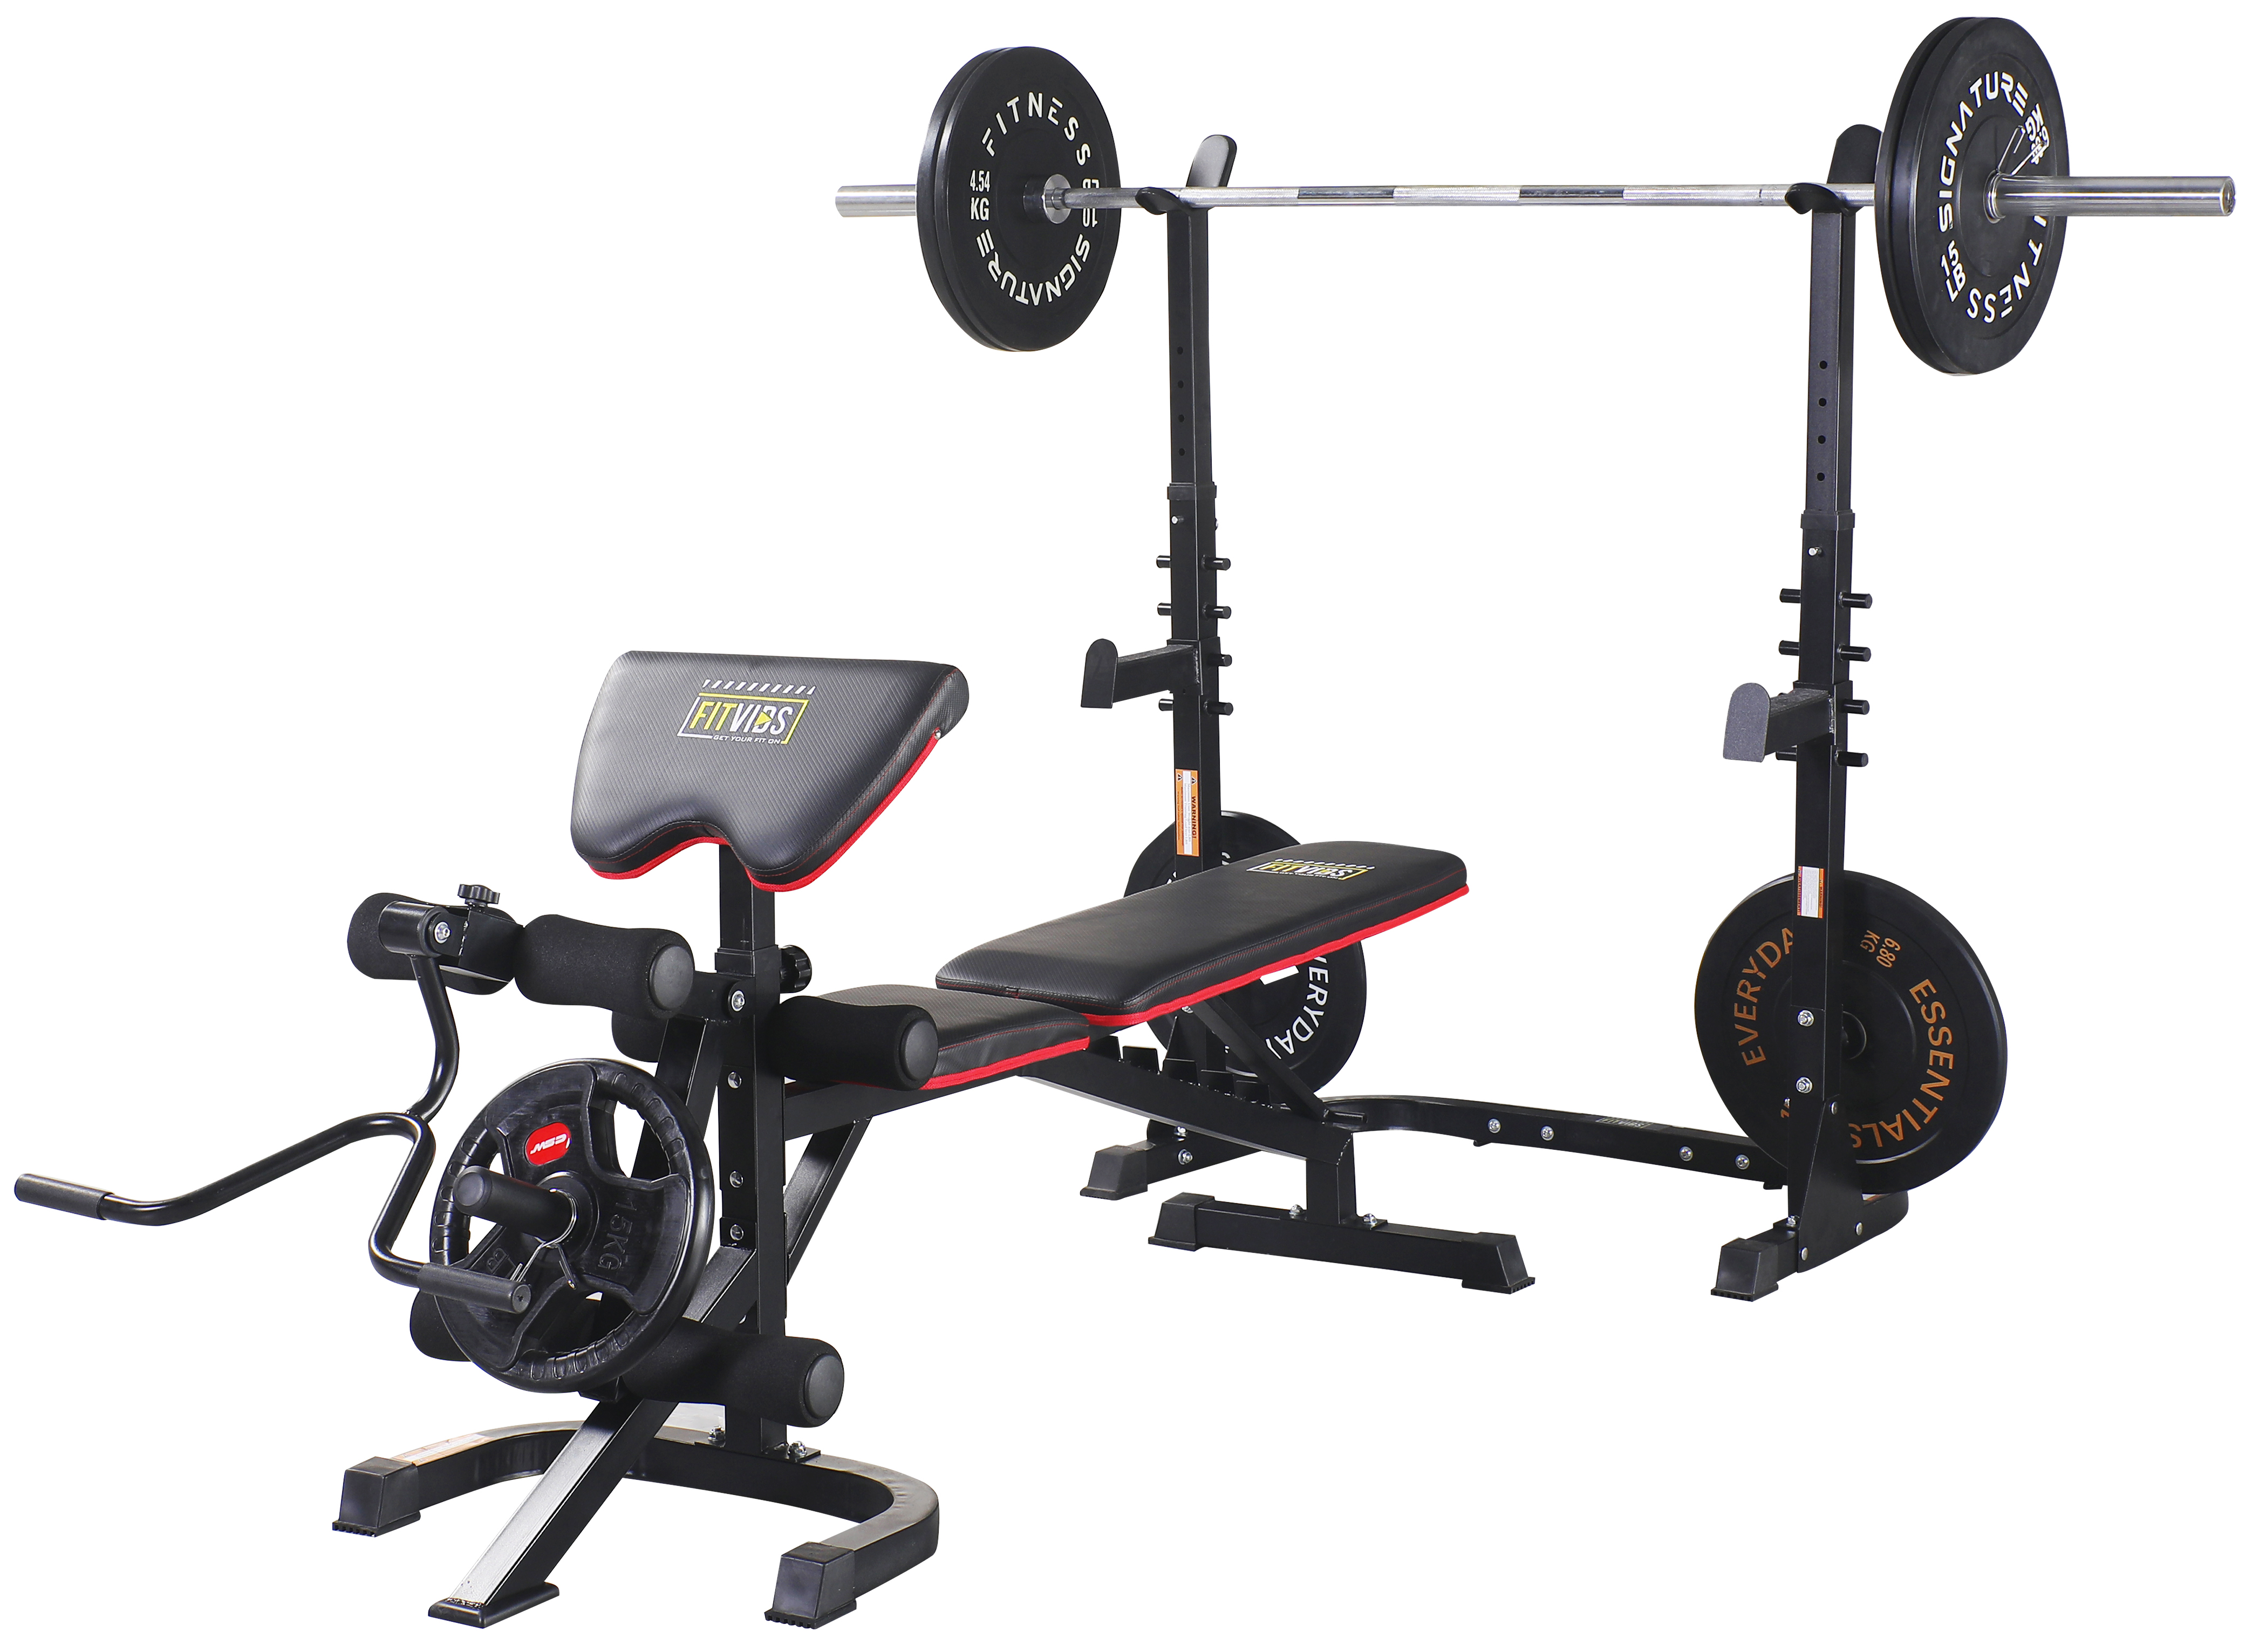 Fitvids LX600 Adjustable Olympic Workout Bench with Squat Rack, Leg Extension, Preacher Curl, and Weight Storage, 800-Pound Capacity (Barbell and weights not included) - image 1 of 10